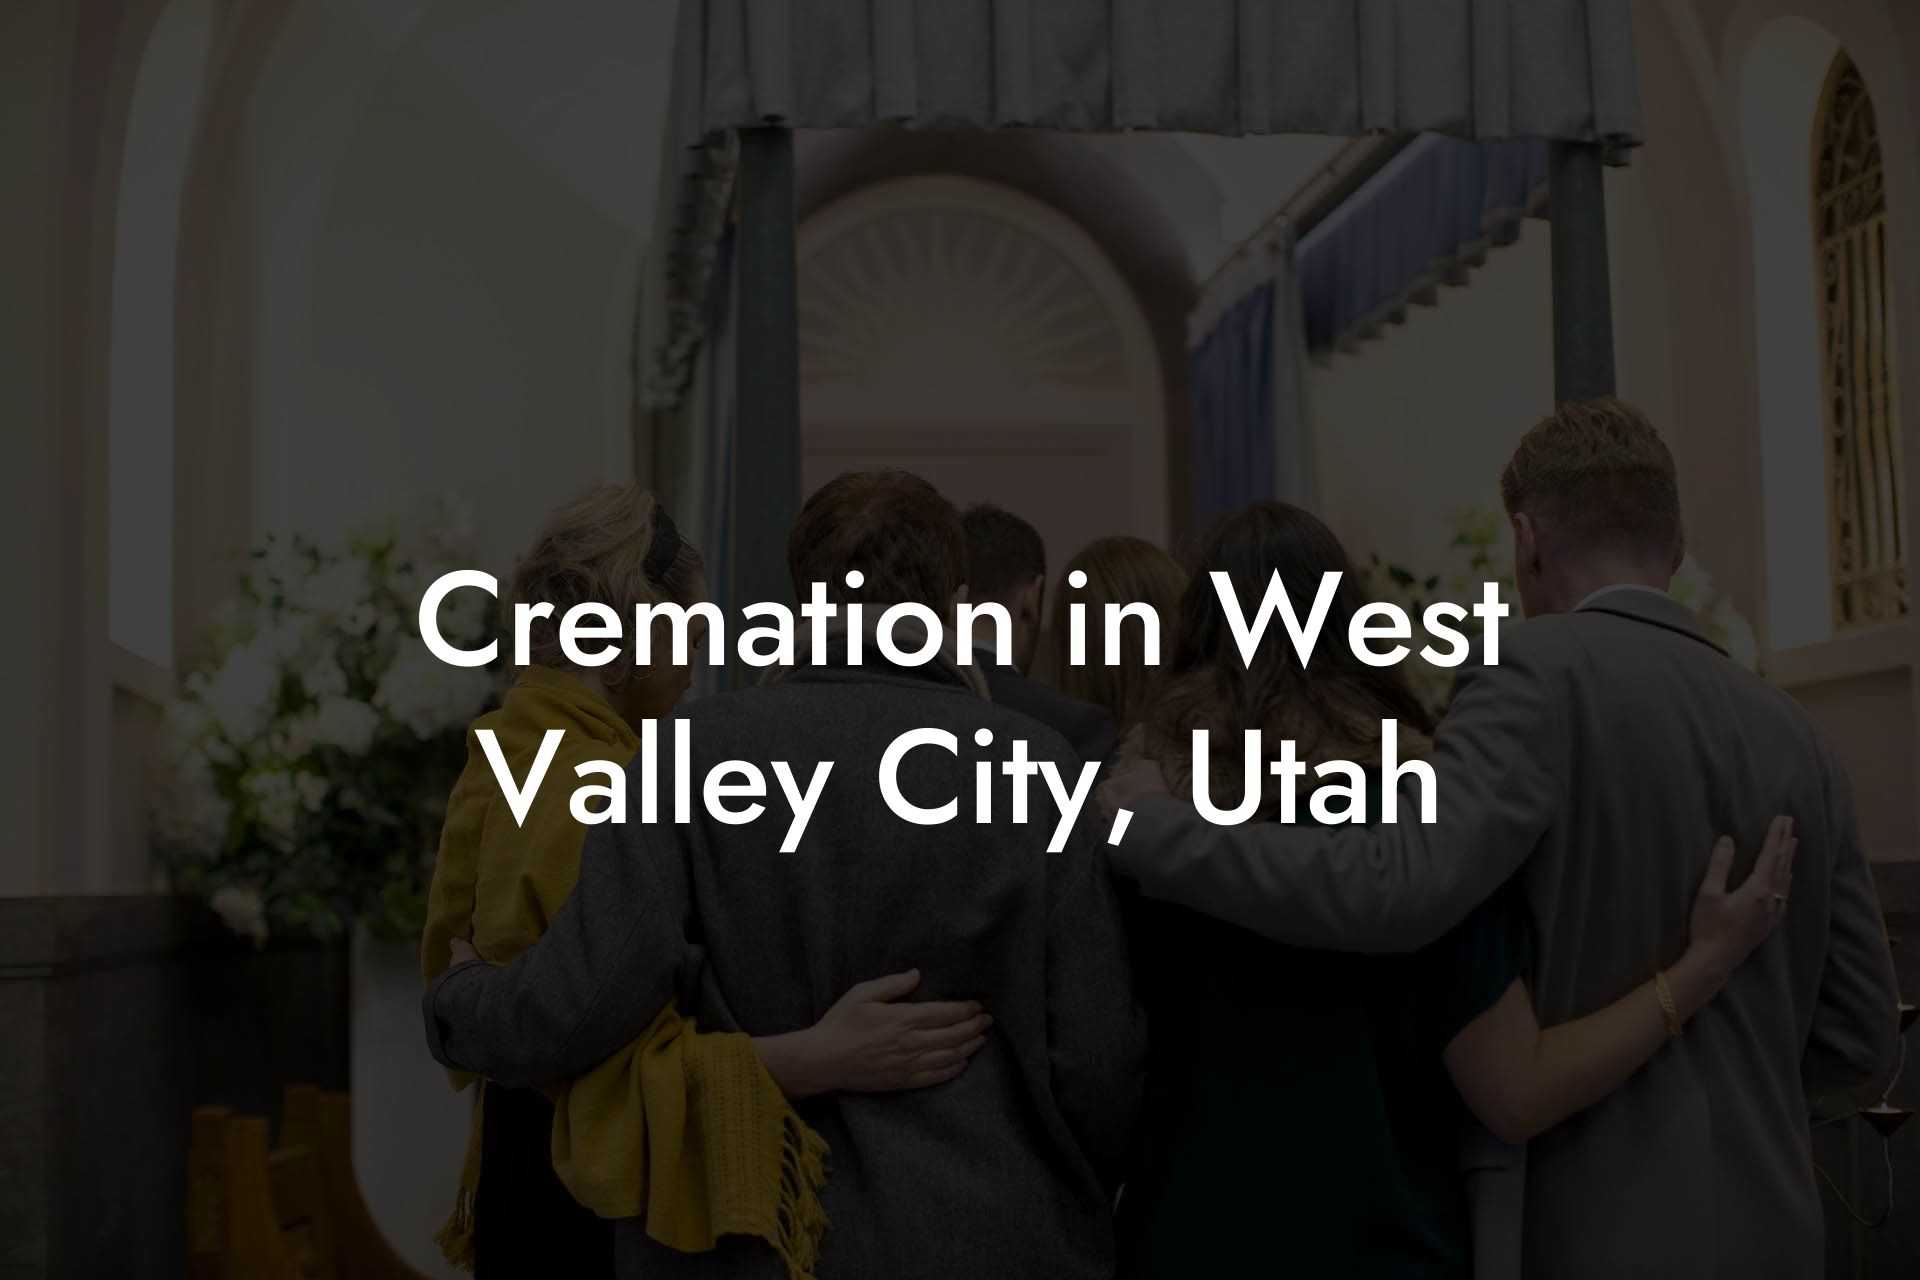 Cremation in West Valley City, Utah